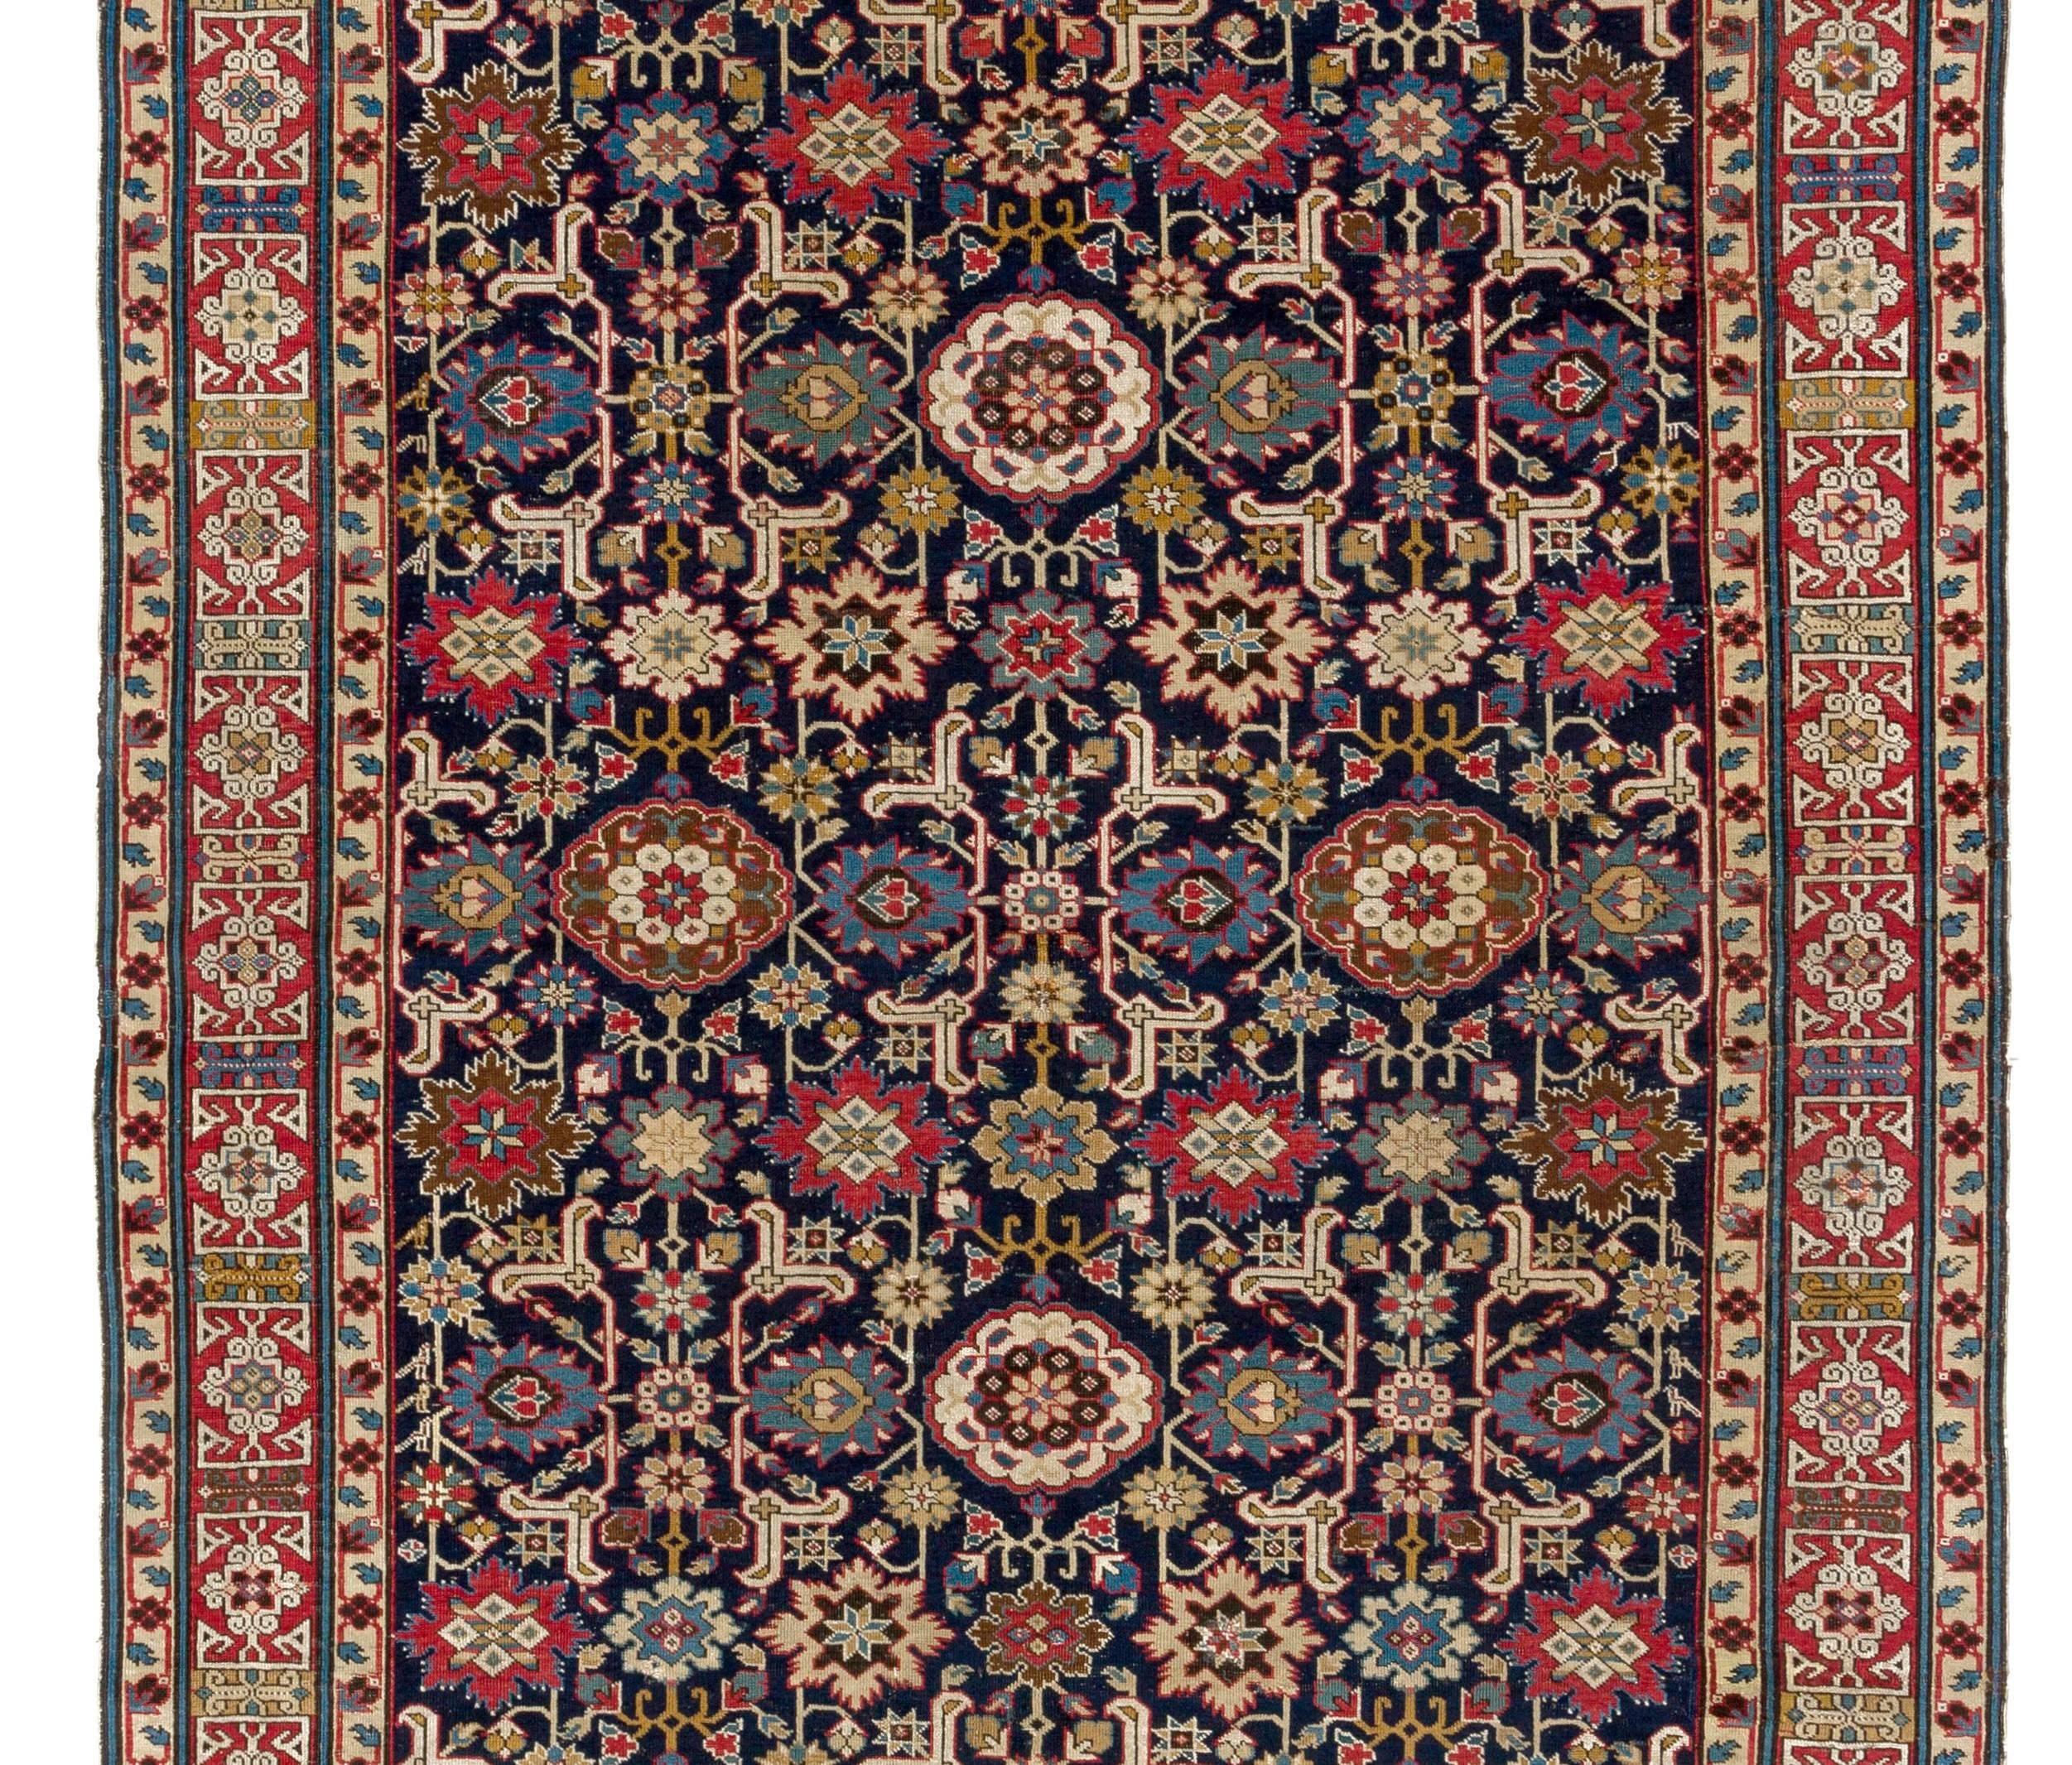 A highly collectible, magnificent Afshan-Kuba rug from circa 1840. One of a family of distinguished rugs that were woven in the Northern Caucasus on commission for palaces and wealthy households. Their design inspiration was Persian and Indian